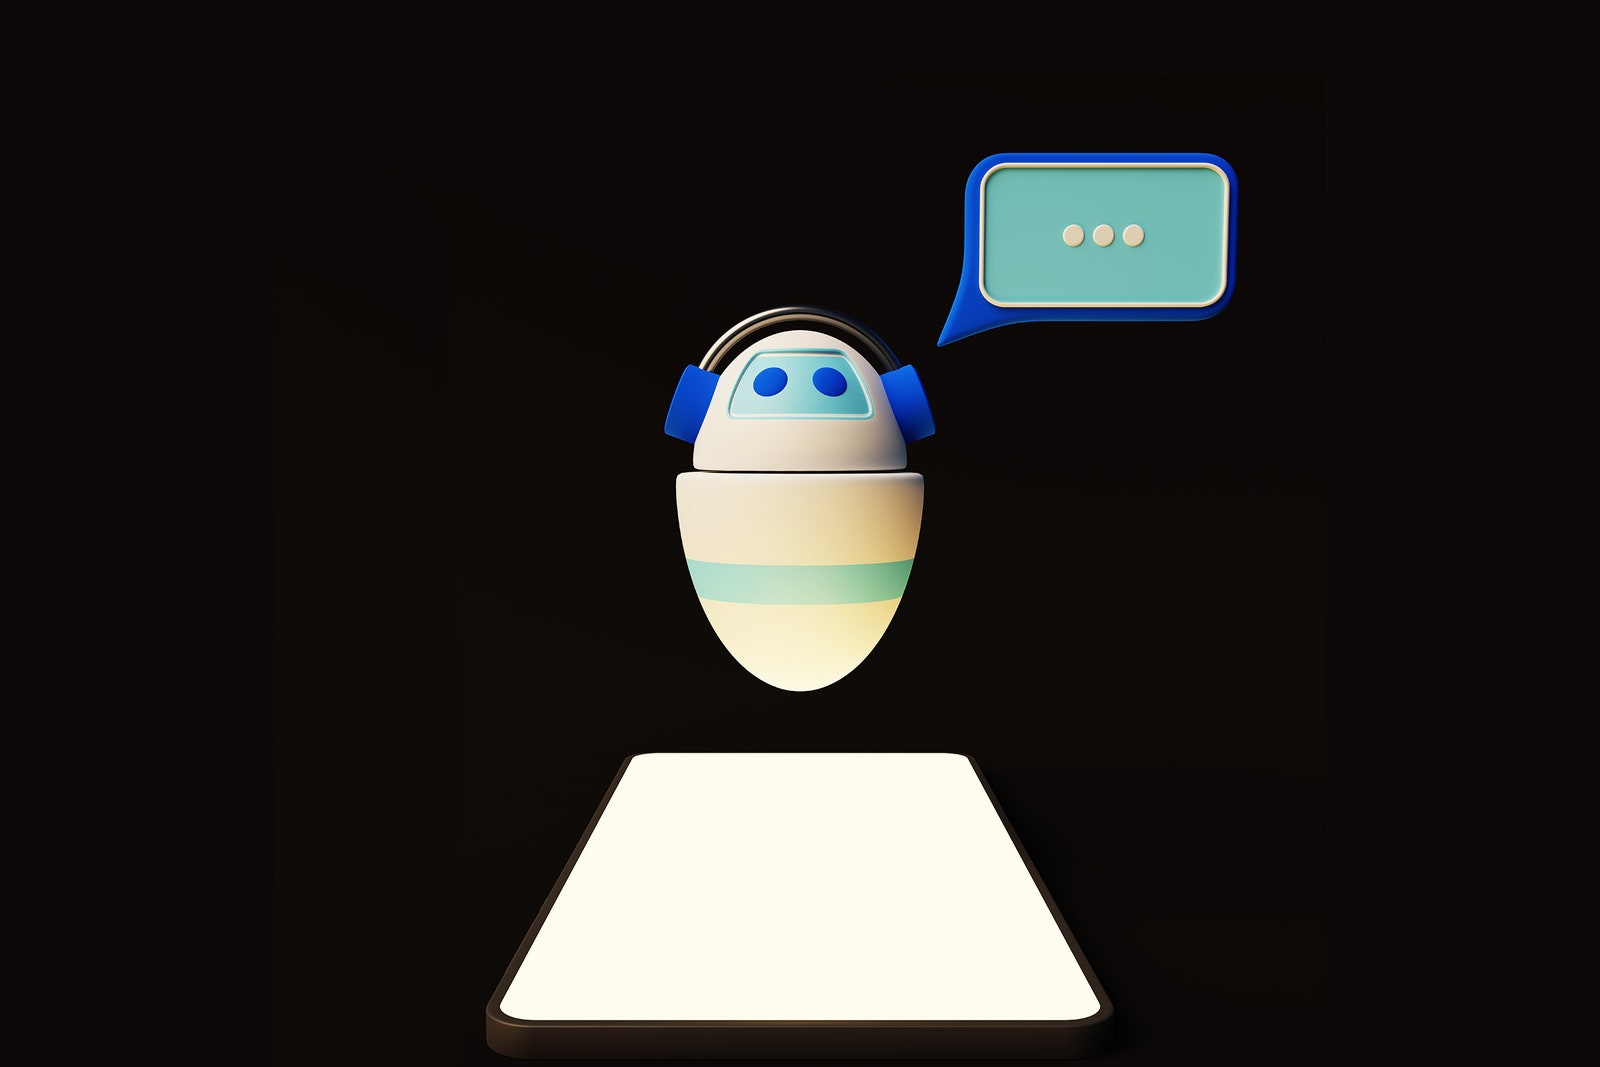 3D render of a robot and speech bubble hovering over a glowing phone screen on a black background